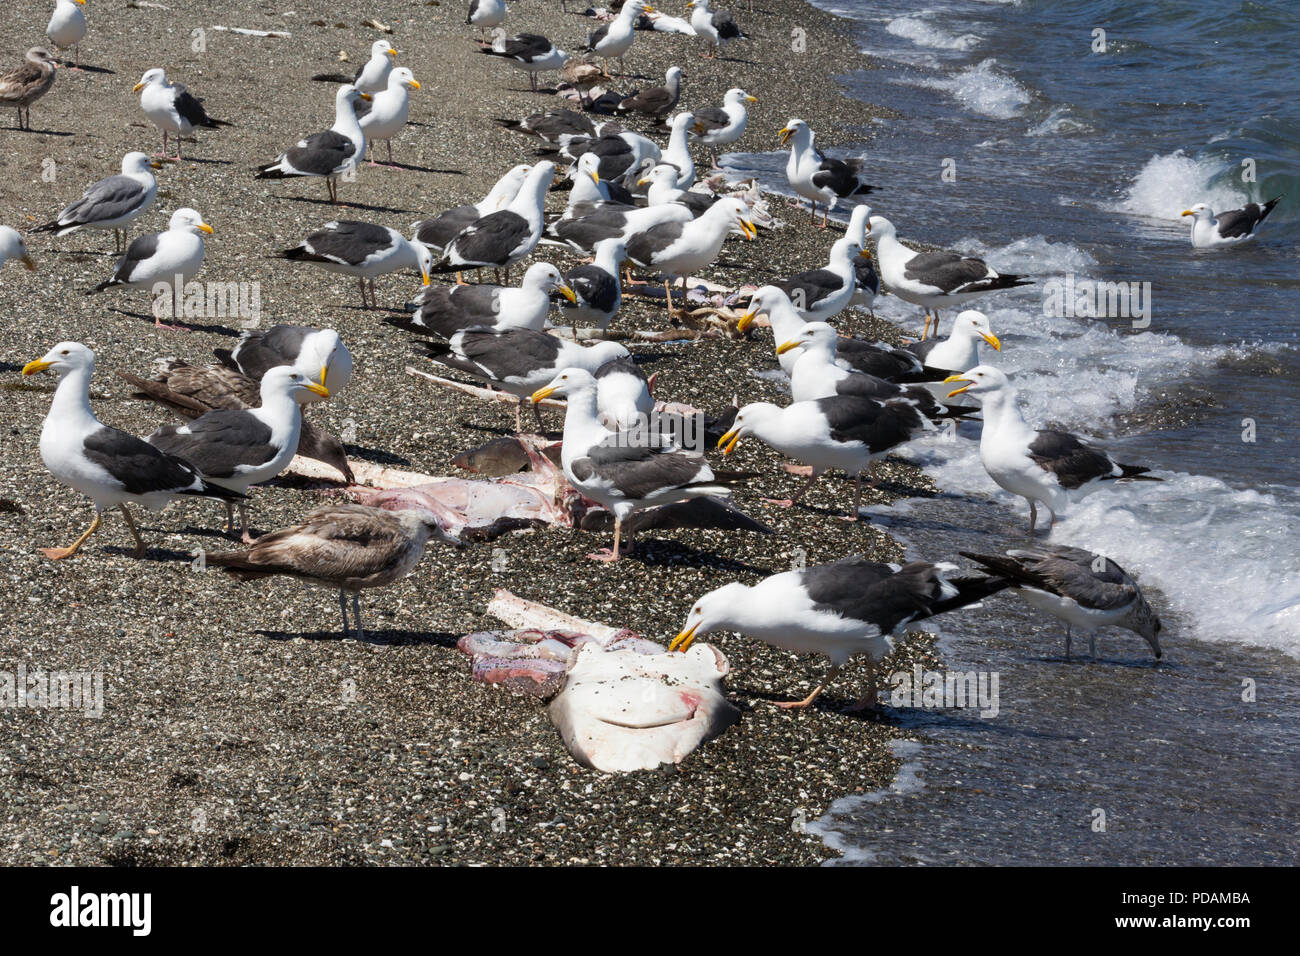 Sharks left on the beach after being finned and cleaned, Belcher Point, Magdalena Island, BCS, Mexico. Stock Photo